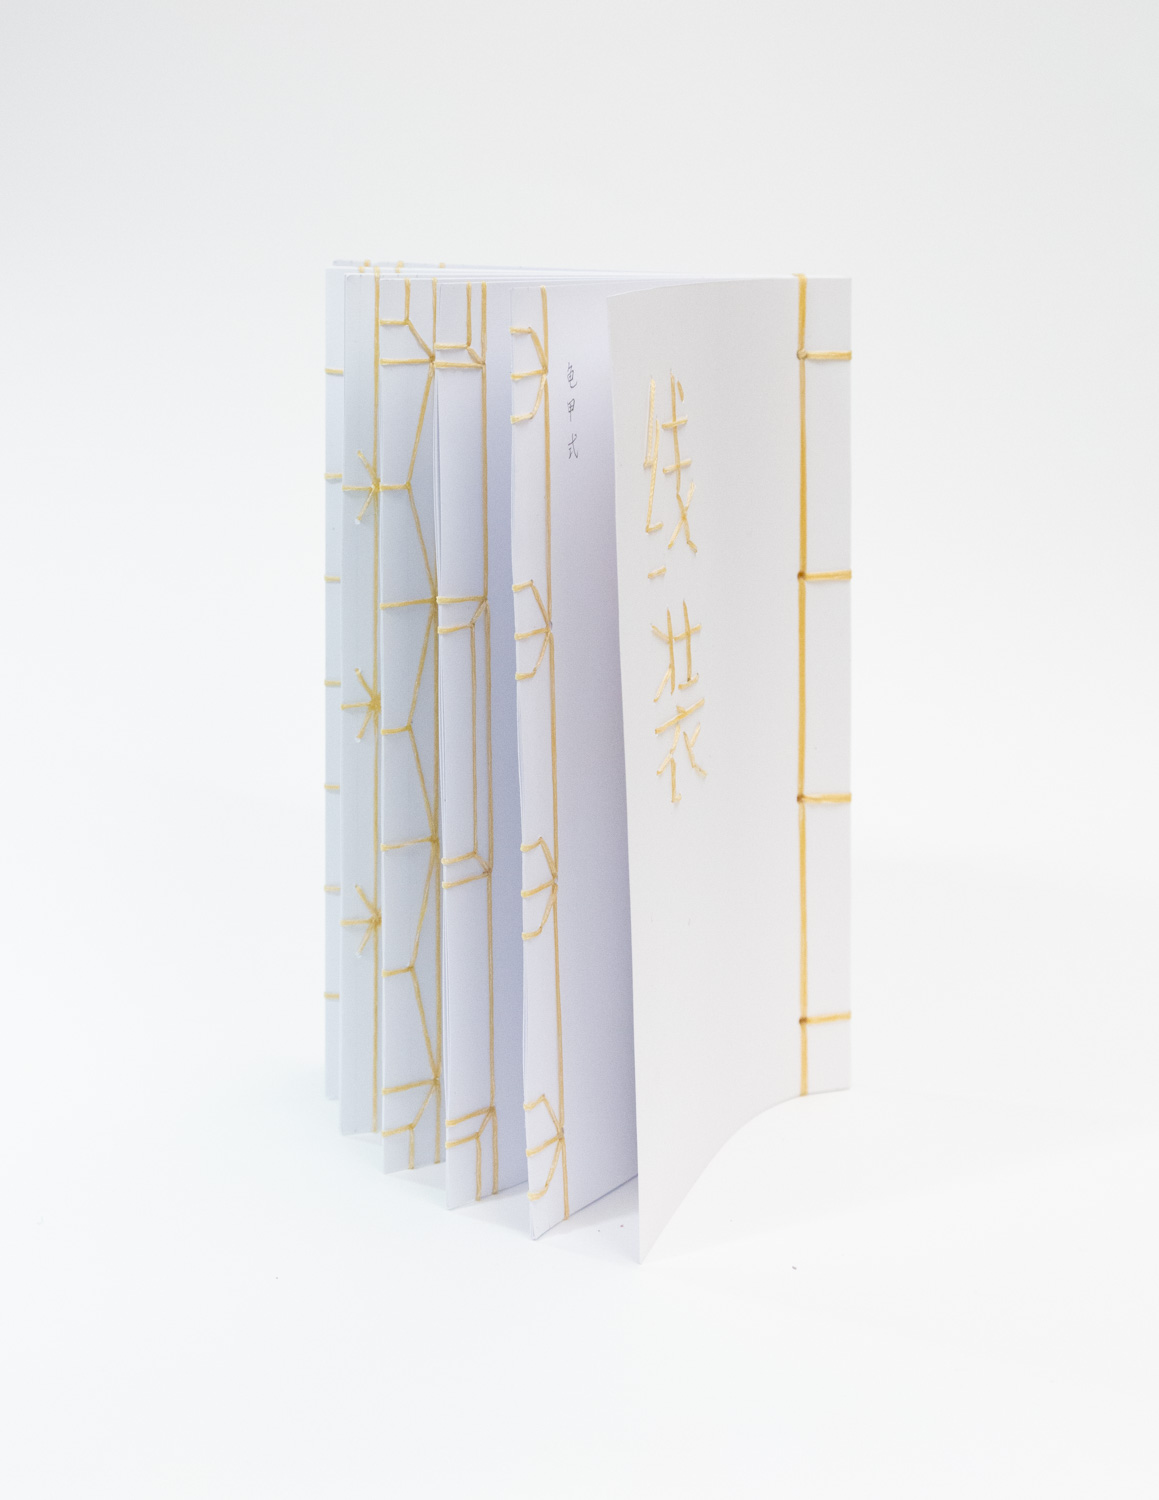 The inner pages of the String Bound book.